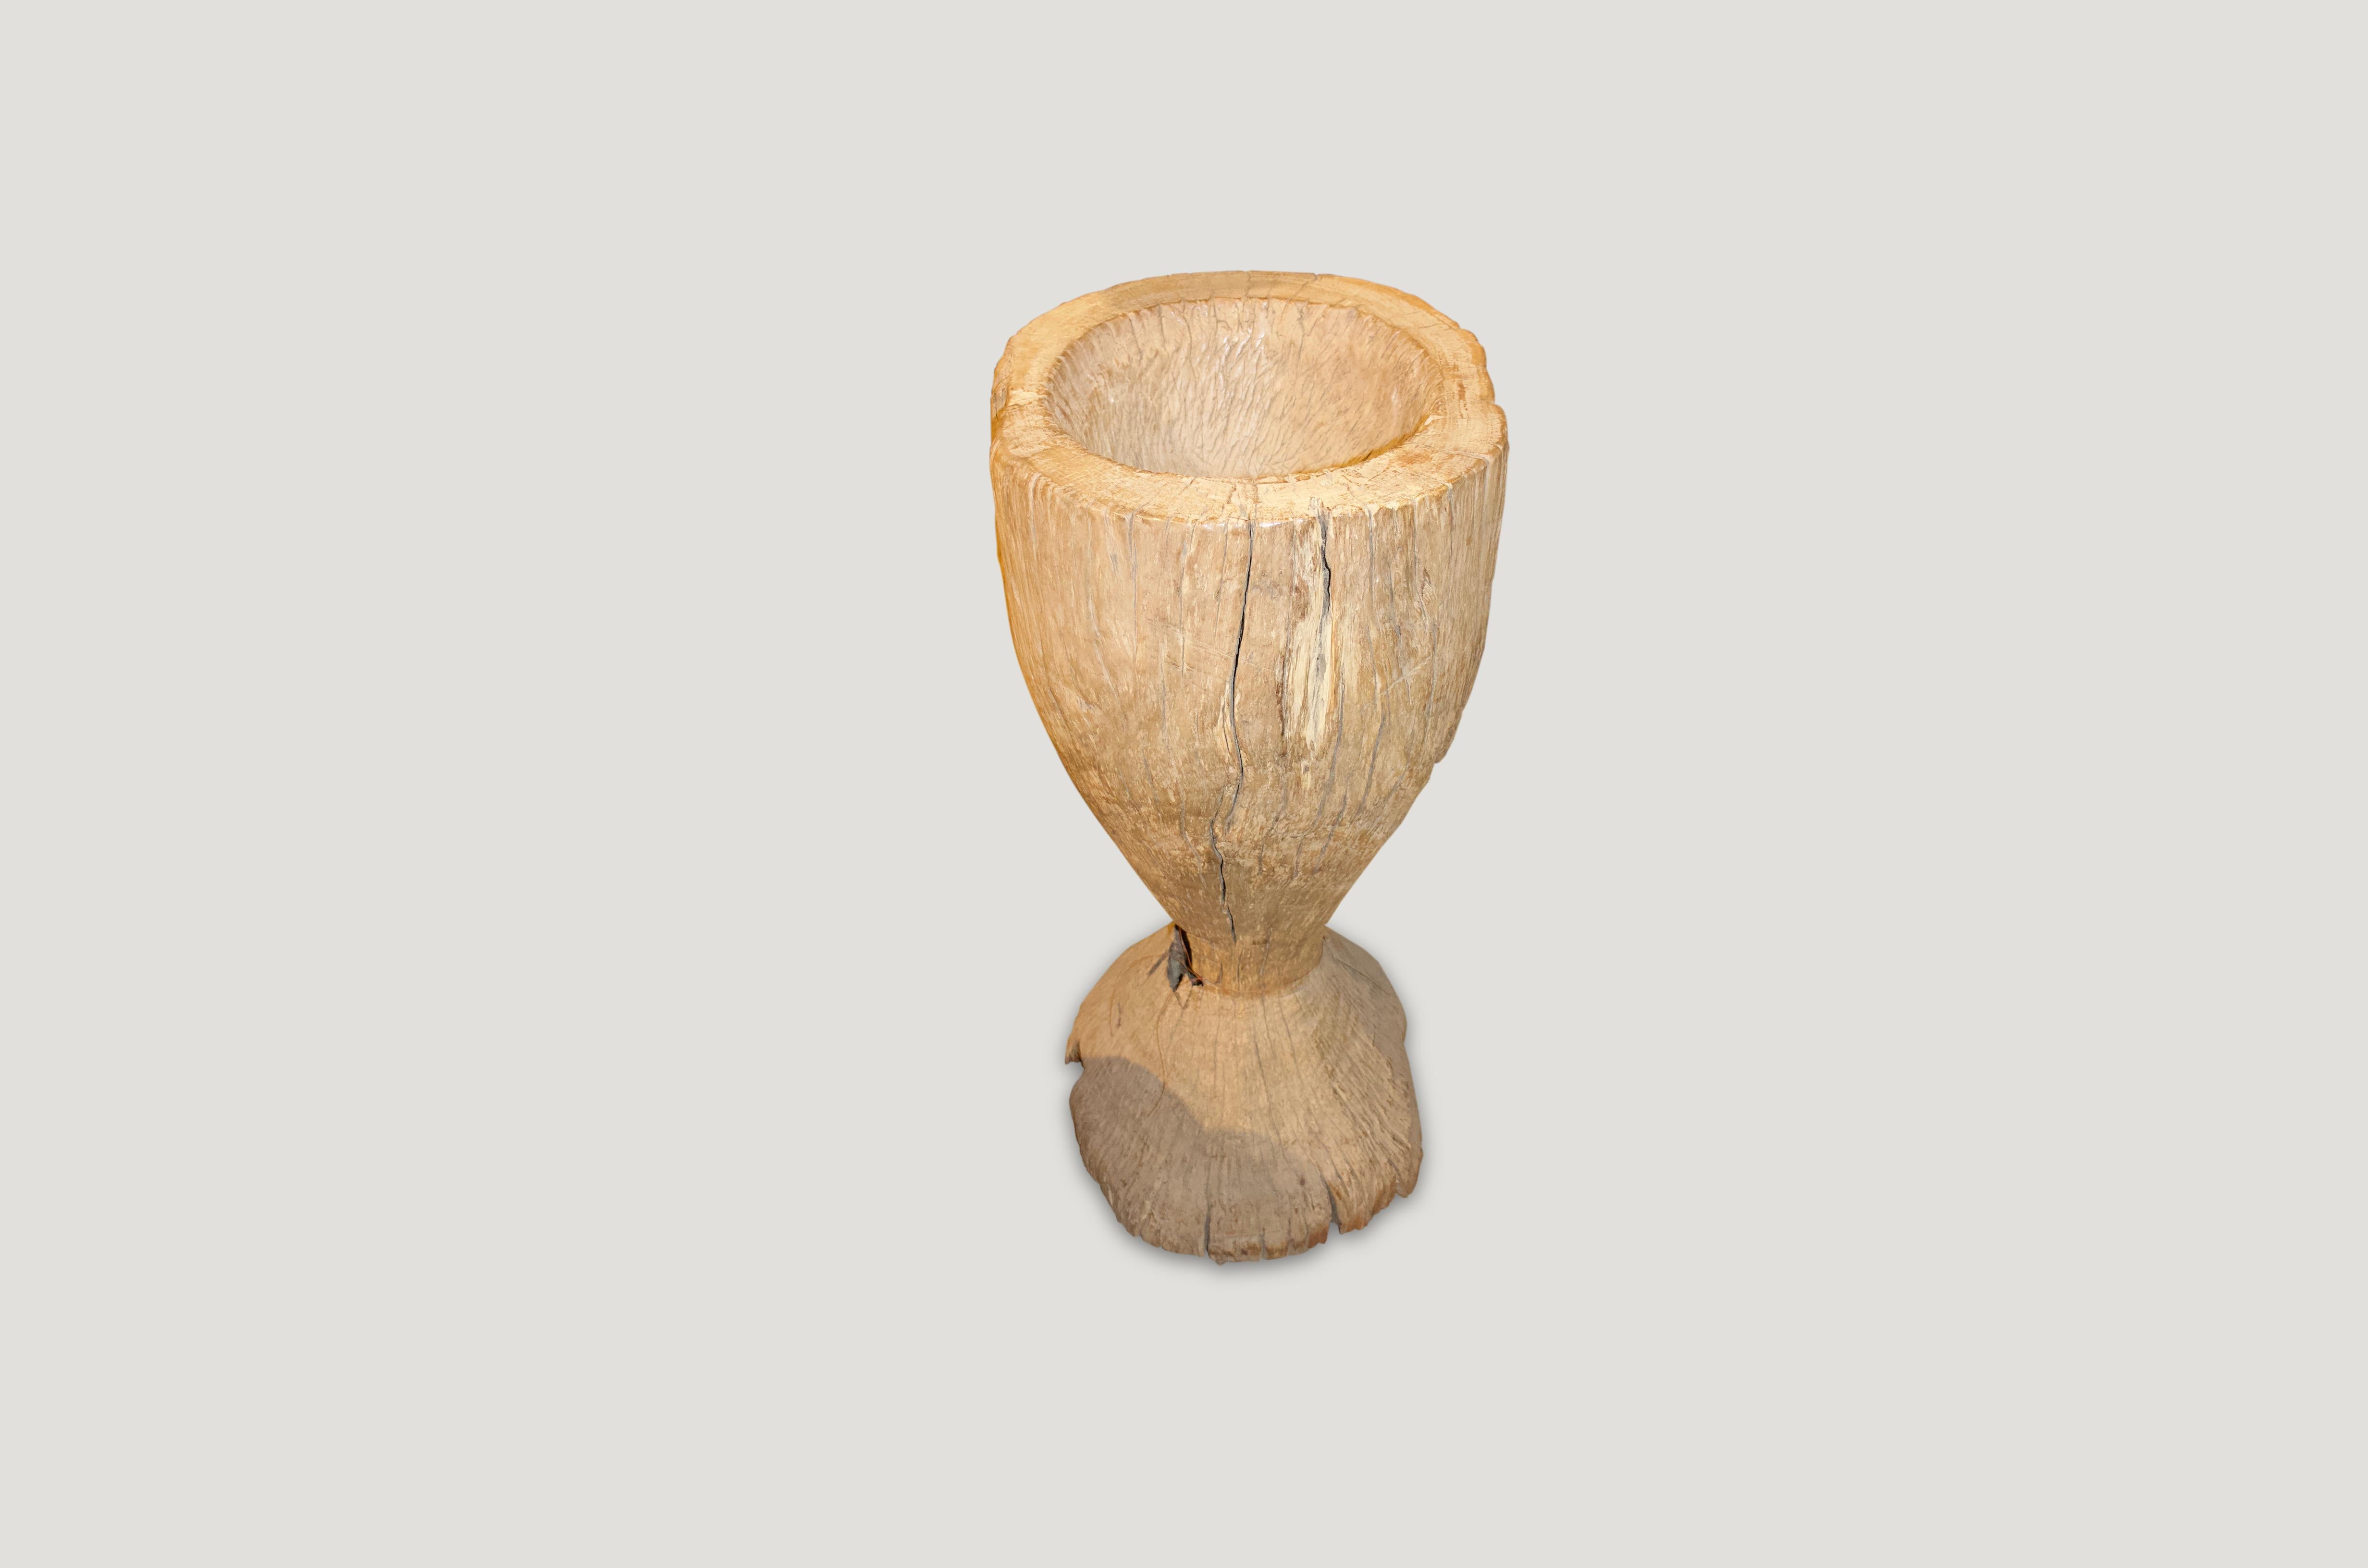 Antique rice pounder carved from a single teak root. Beautiful as a sculpture, holding towels or great as a champagne holder for parties. Also as a table base with a glass top.

This rice pounder was sourced in the spirit of wabi-sabi, a Japanese